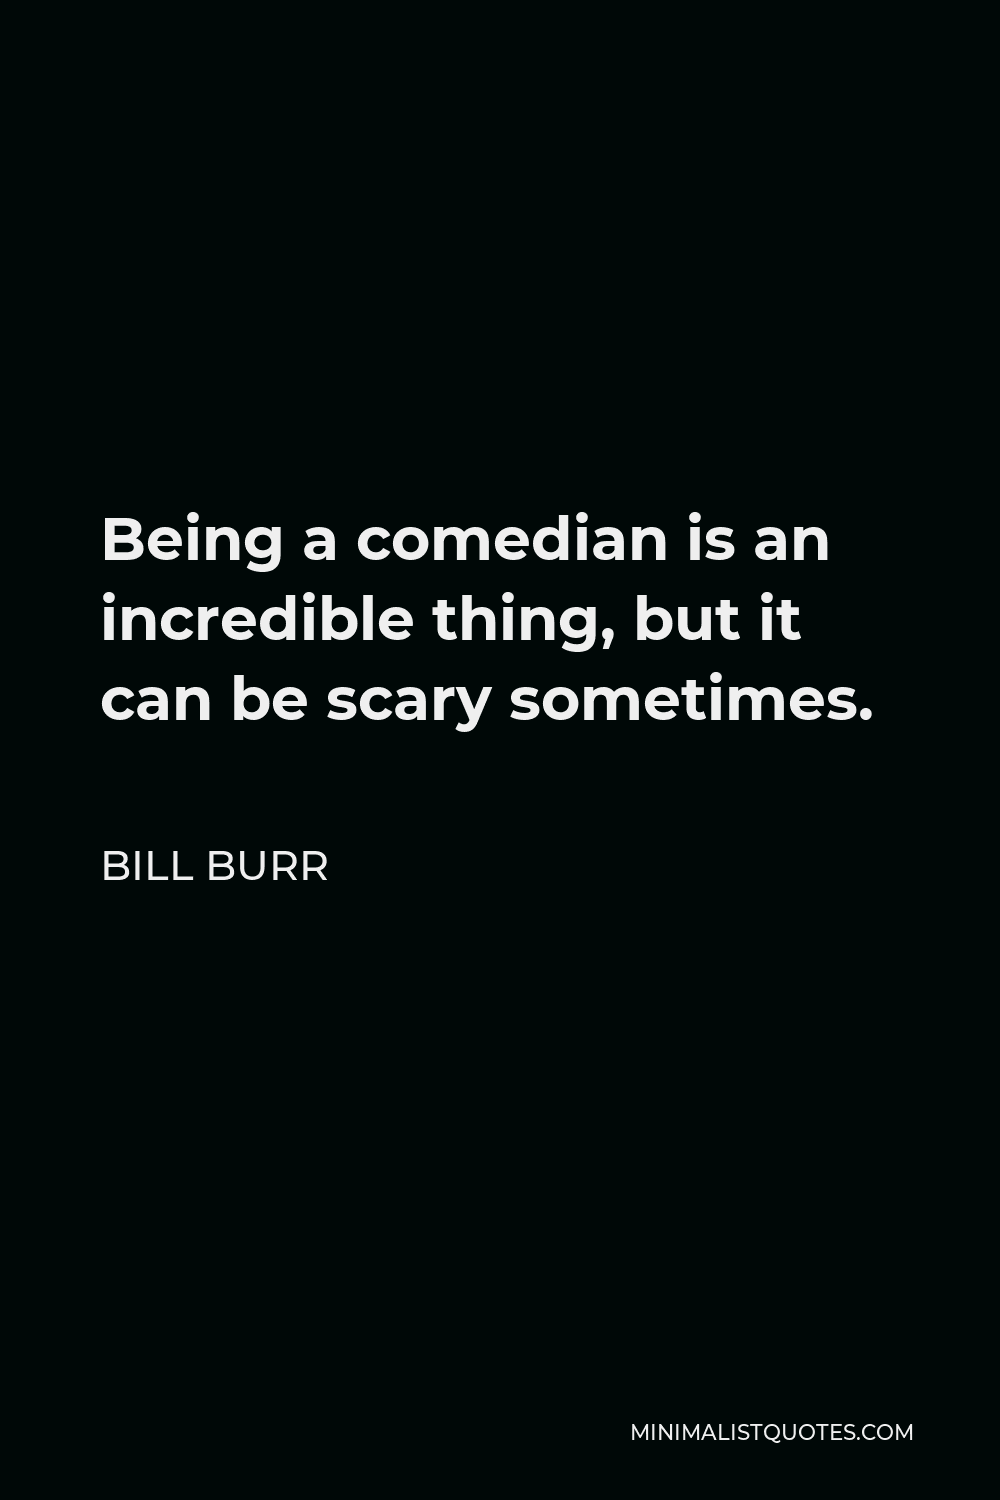 Bill Burr Quote - Being a comedian is an incredible thing, but it can be scary sometimes.